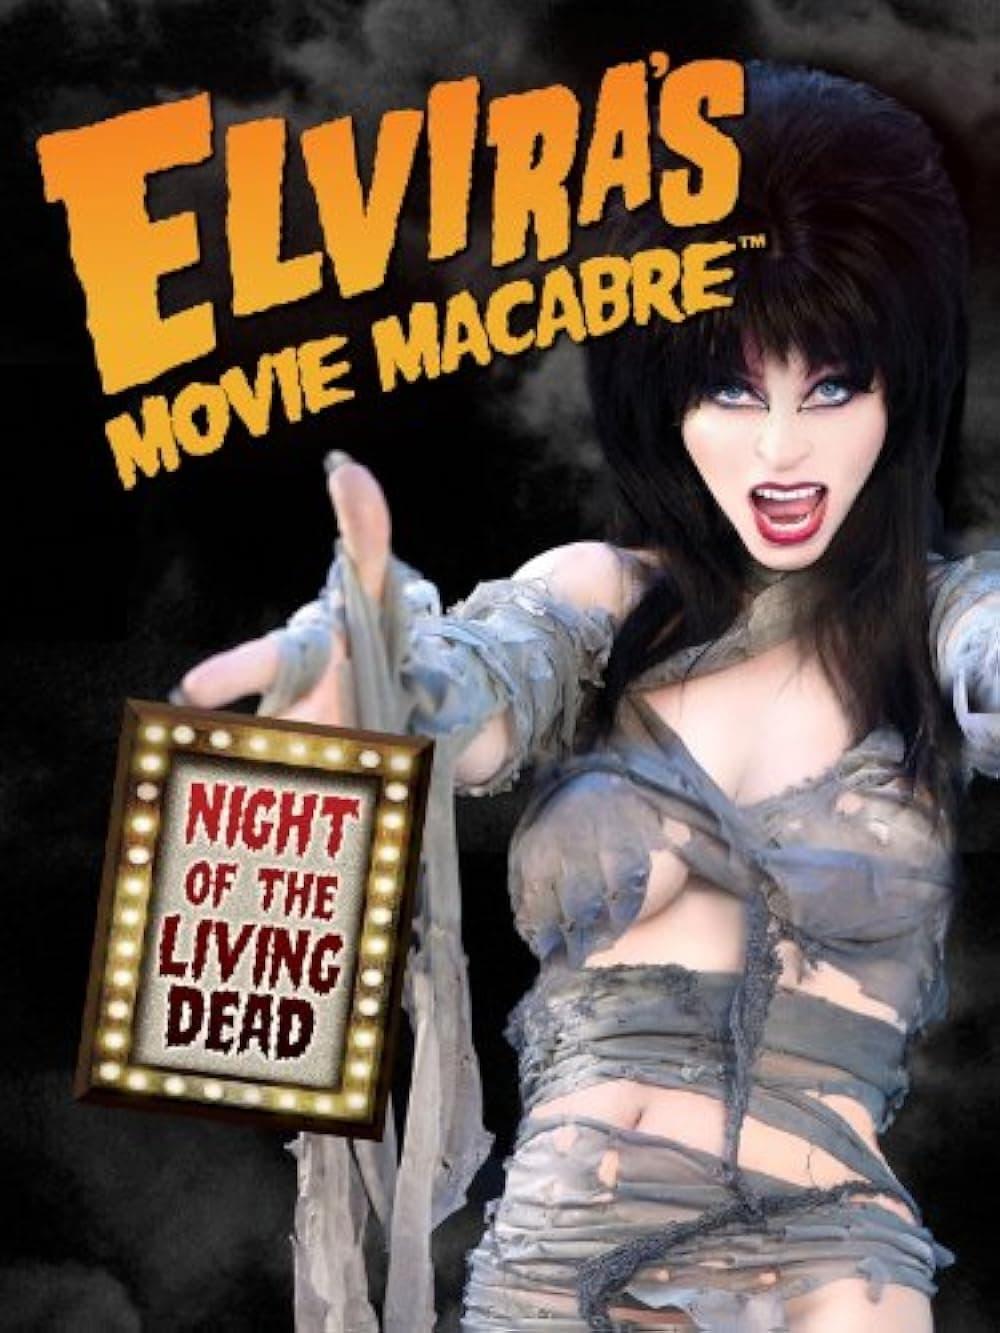 Elvira’s Movie Macabre: Night Of The Living Dead poster